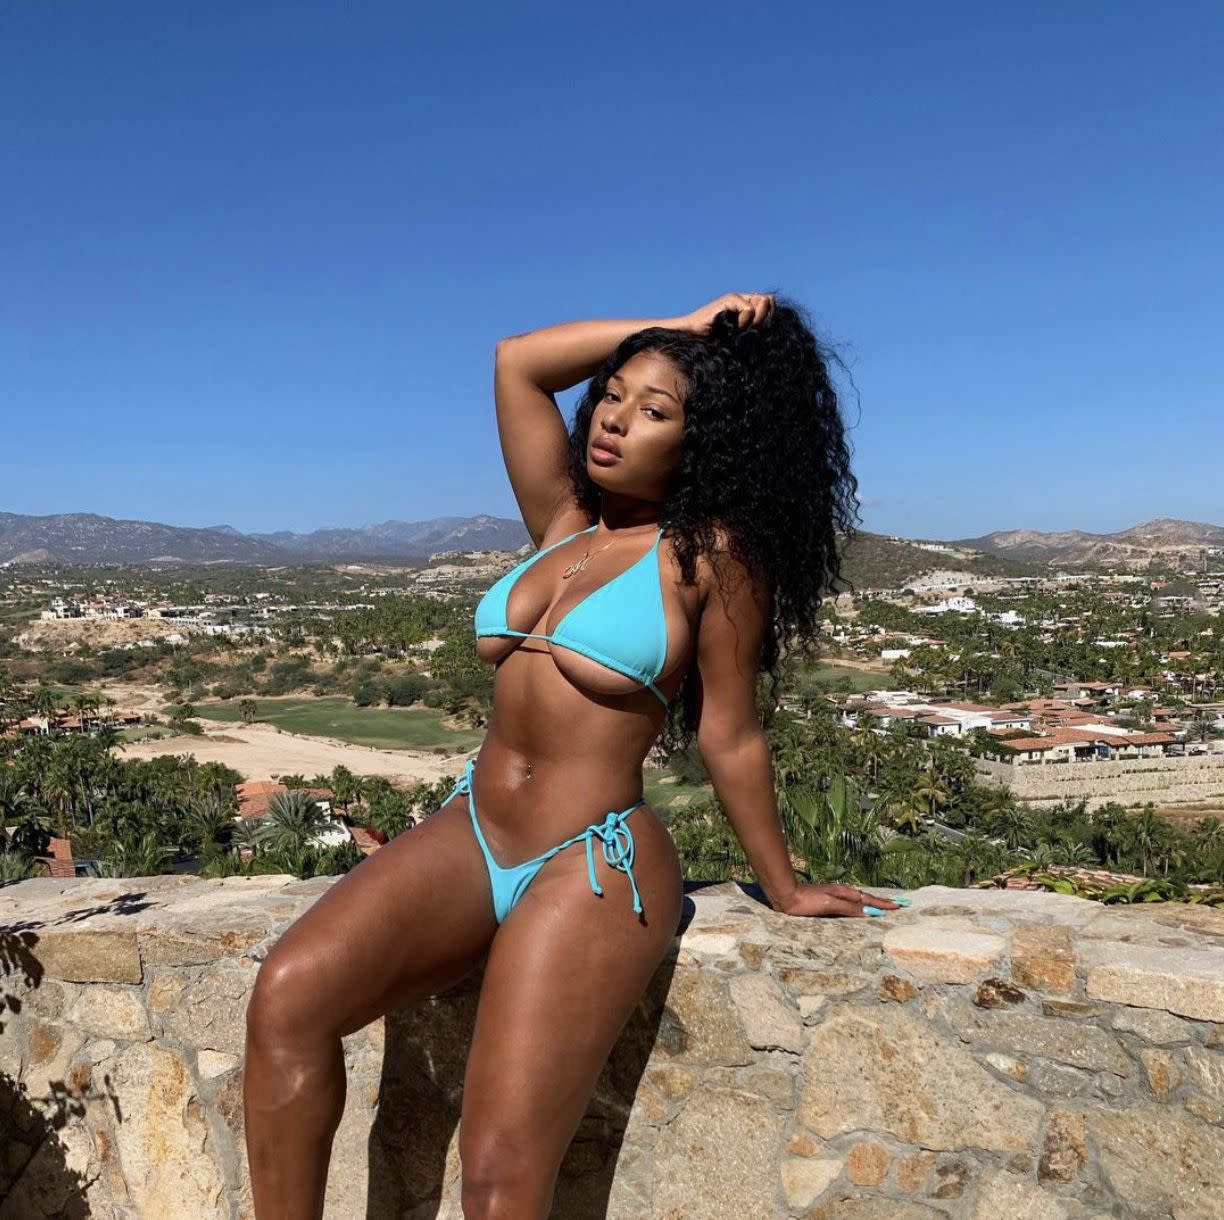 "Body" rapper Megan Thee Stallion, 25, shows off her "BODY ODY" while soaking up the sun on Tuesday, Dec. 29, 2020.